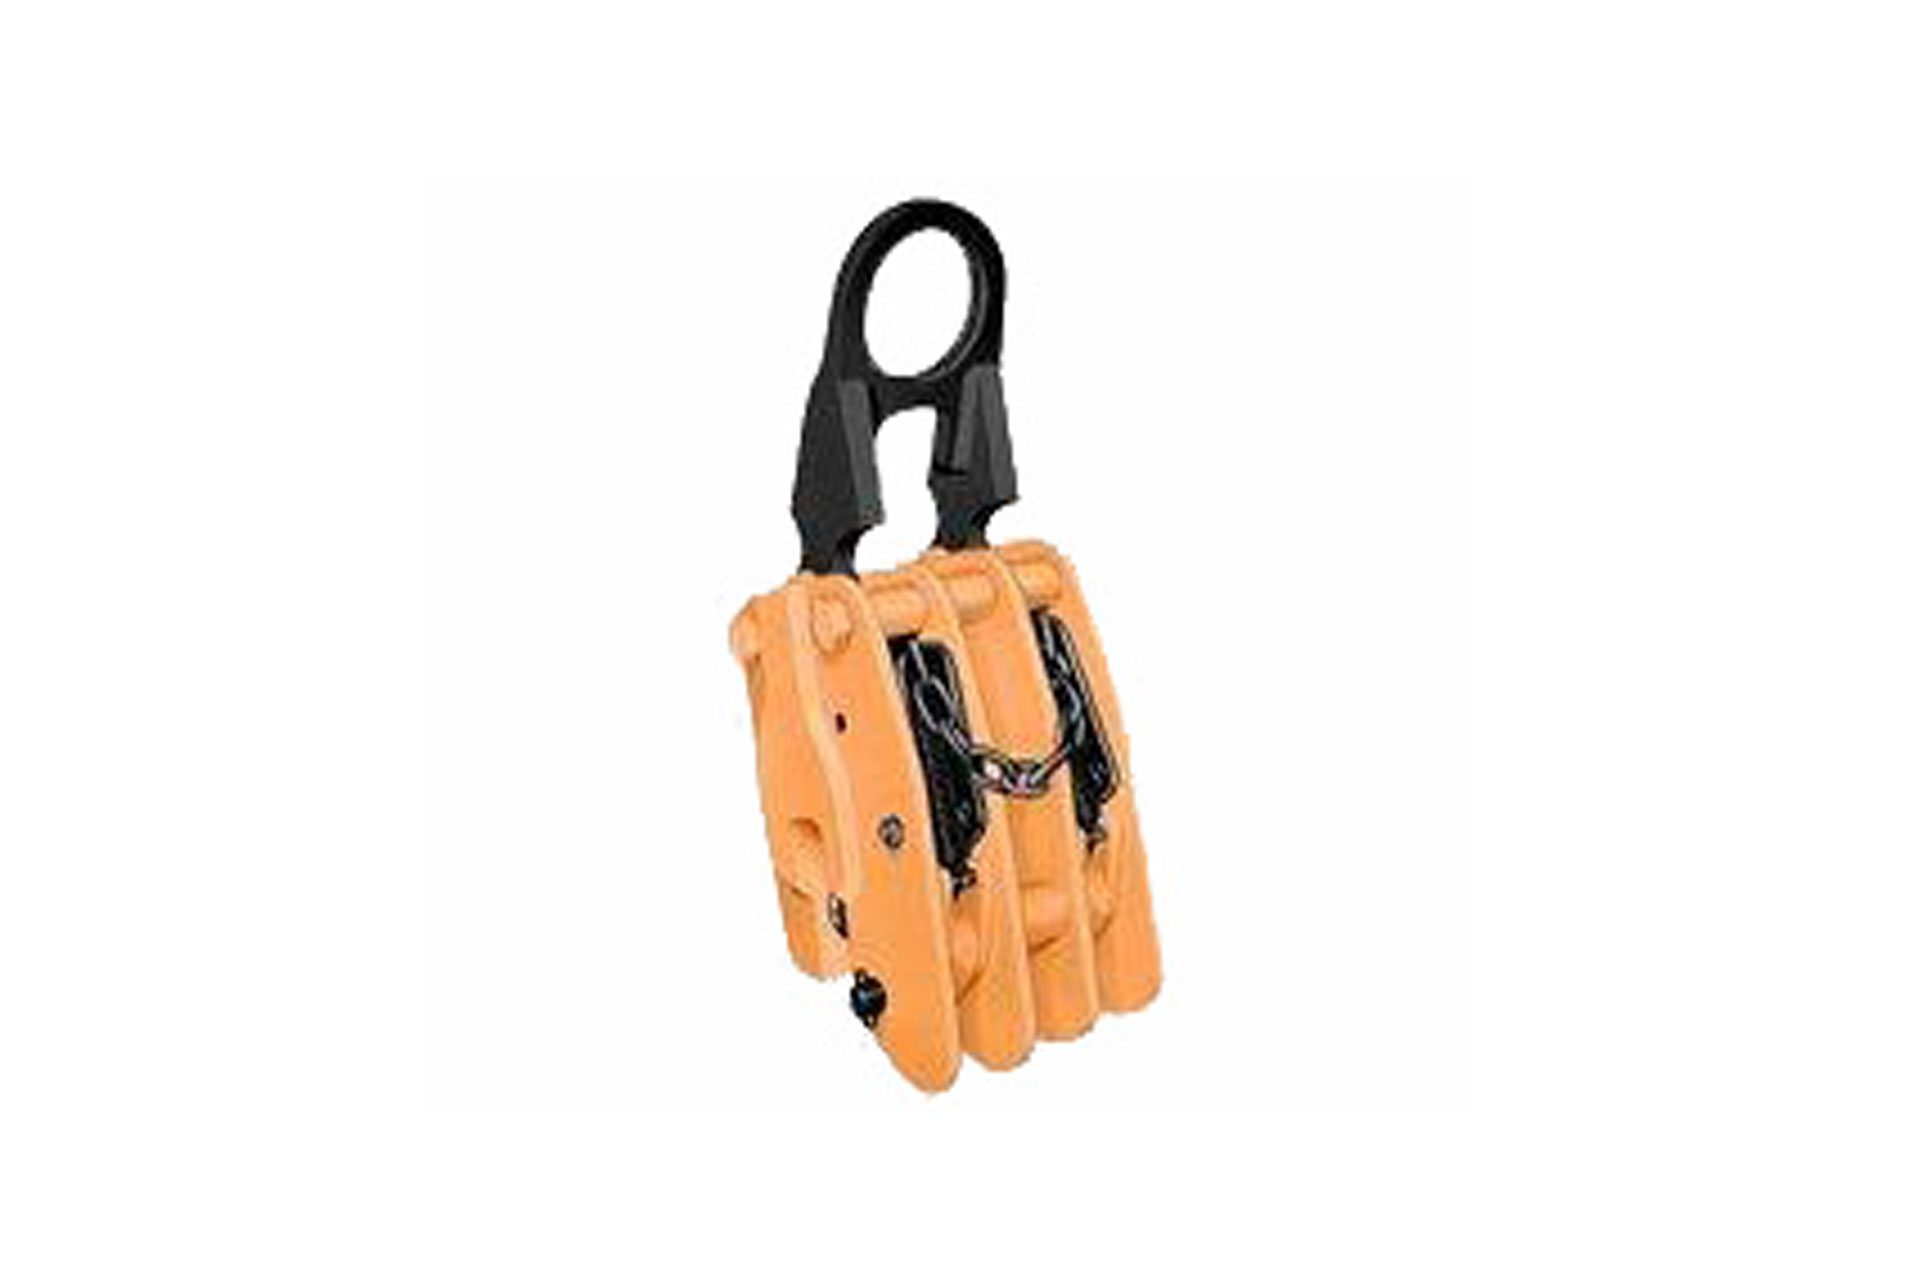 Vertical plate lifting Clamp extra heavy duty